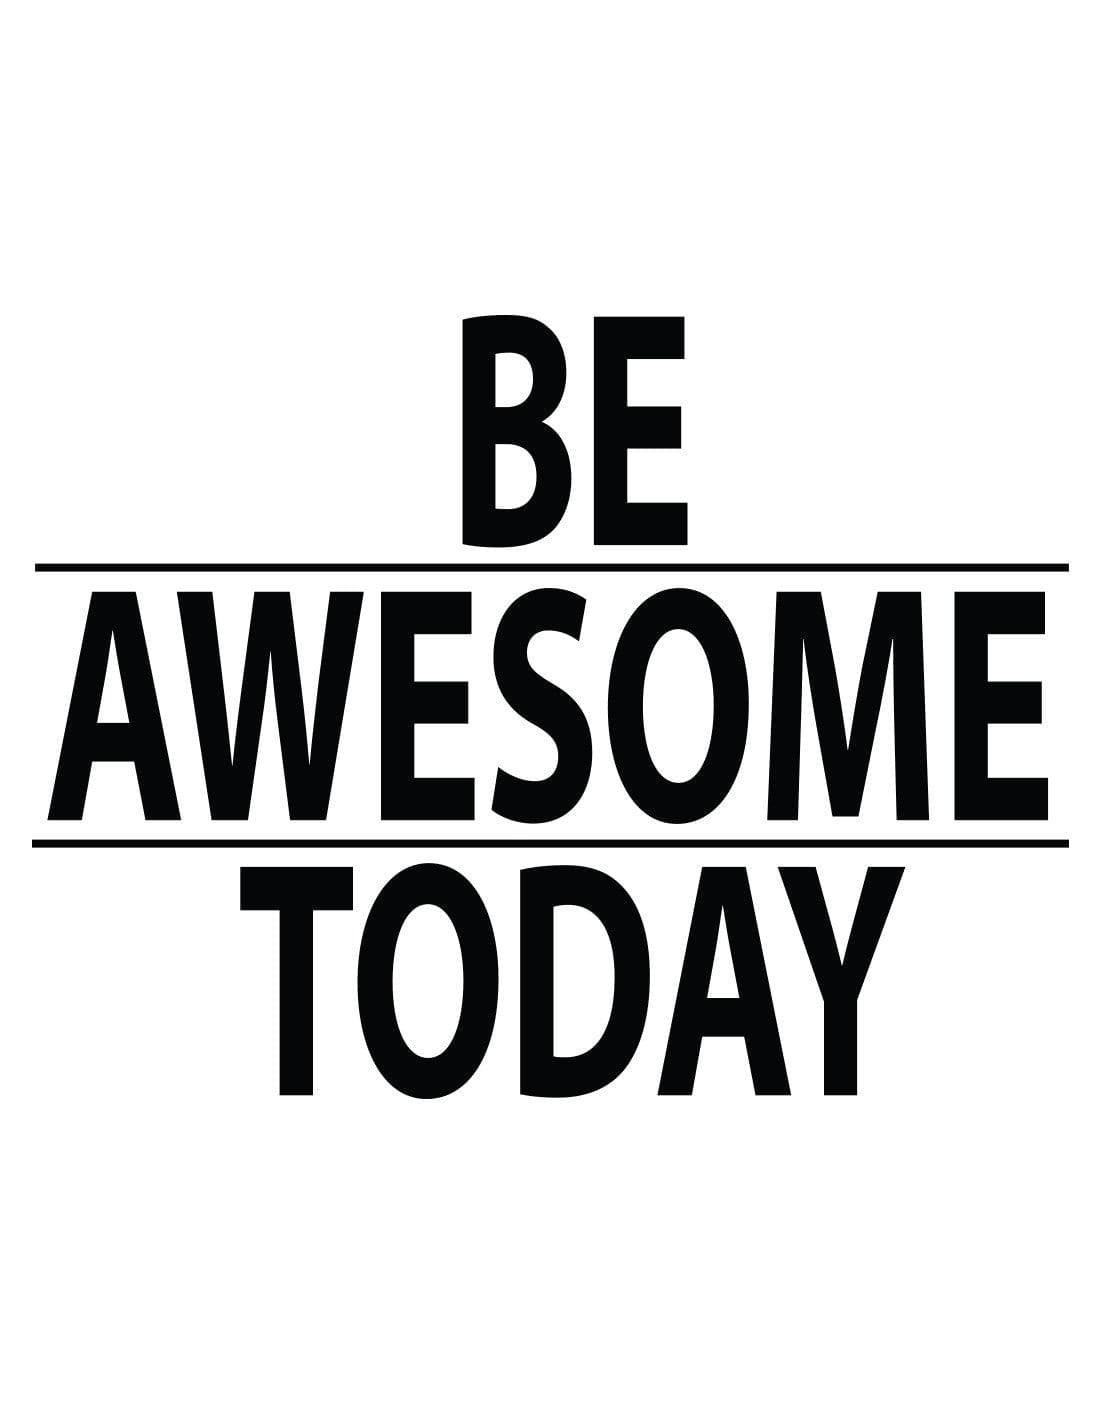 A black text decal saying "BE AWESOME TODAY" on a white background. 